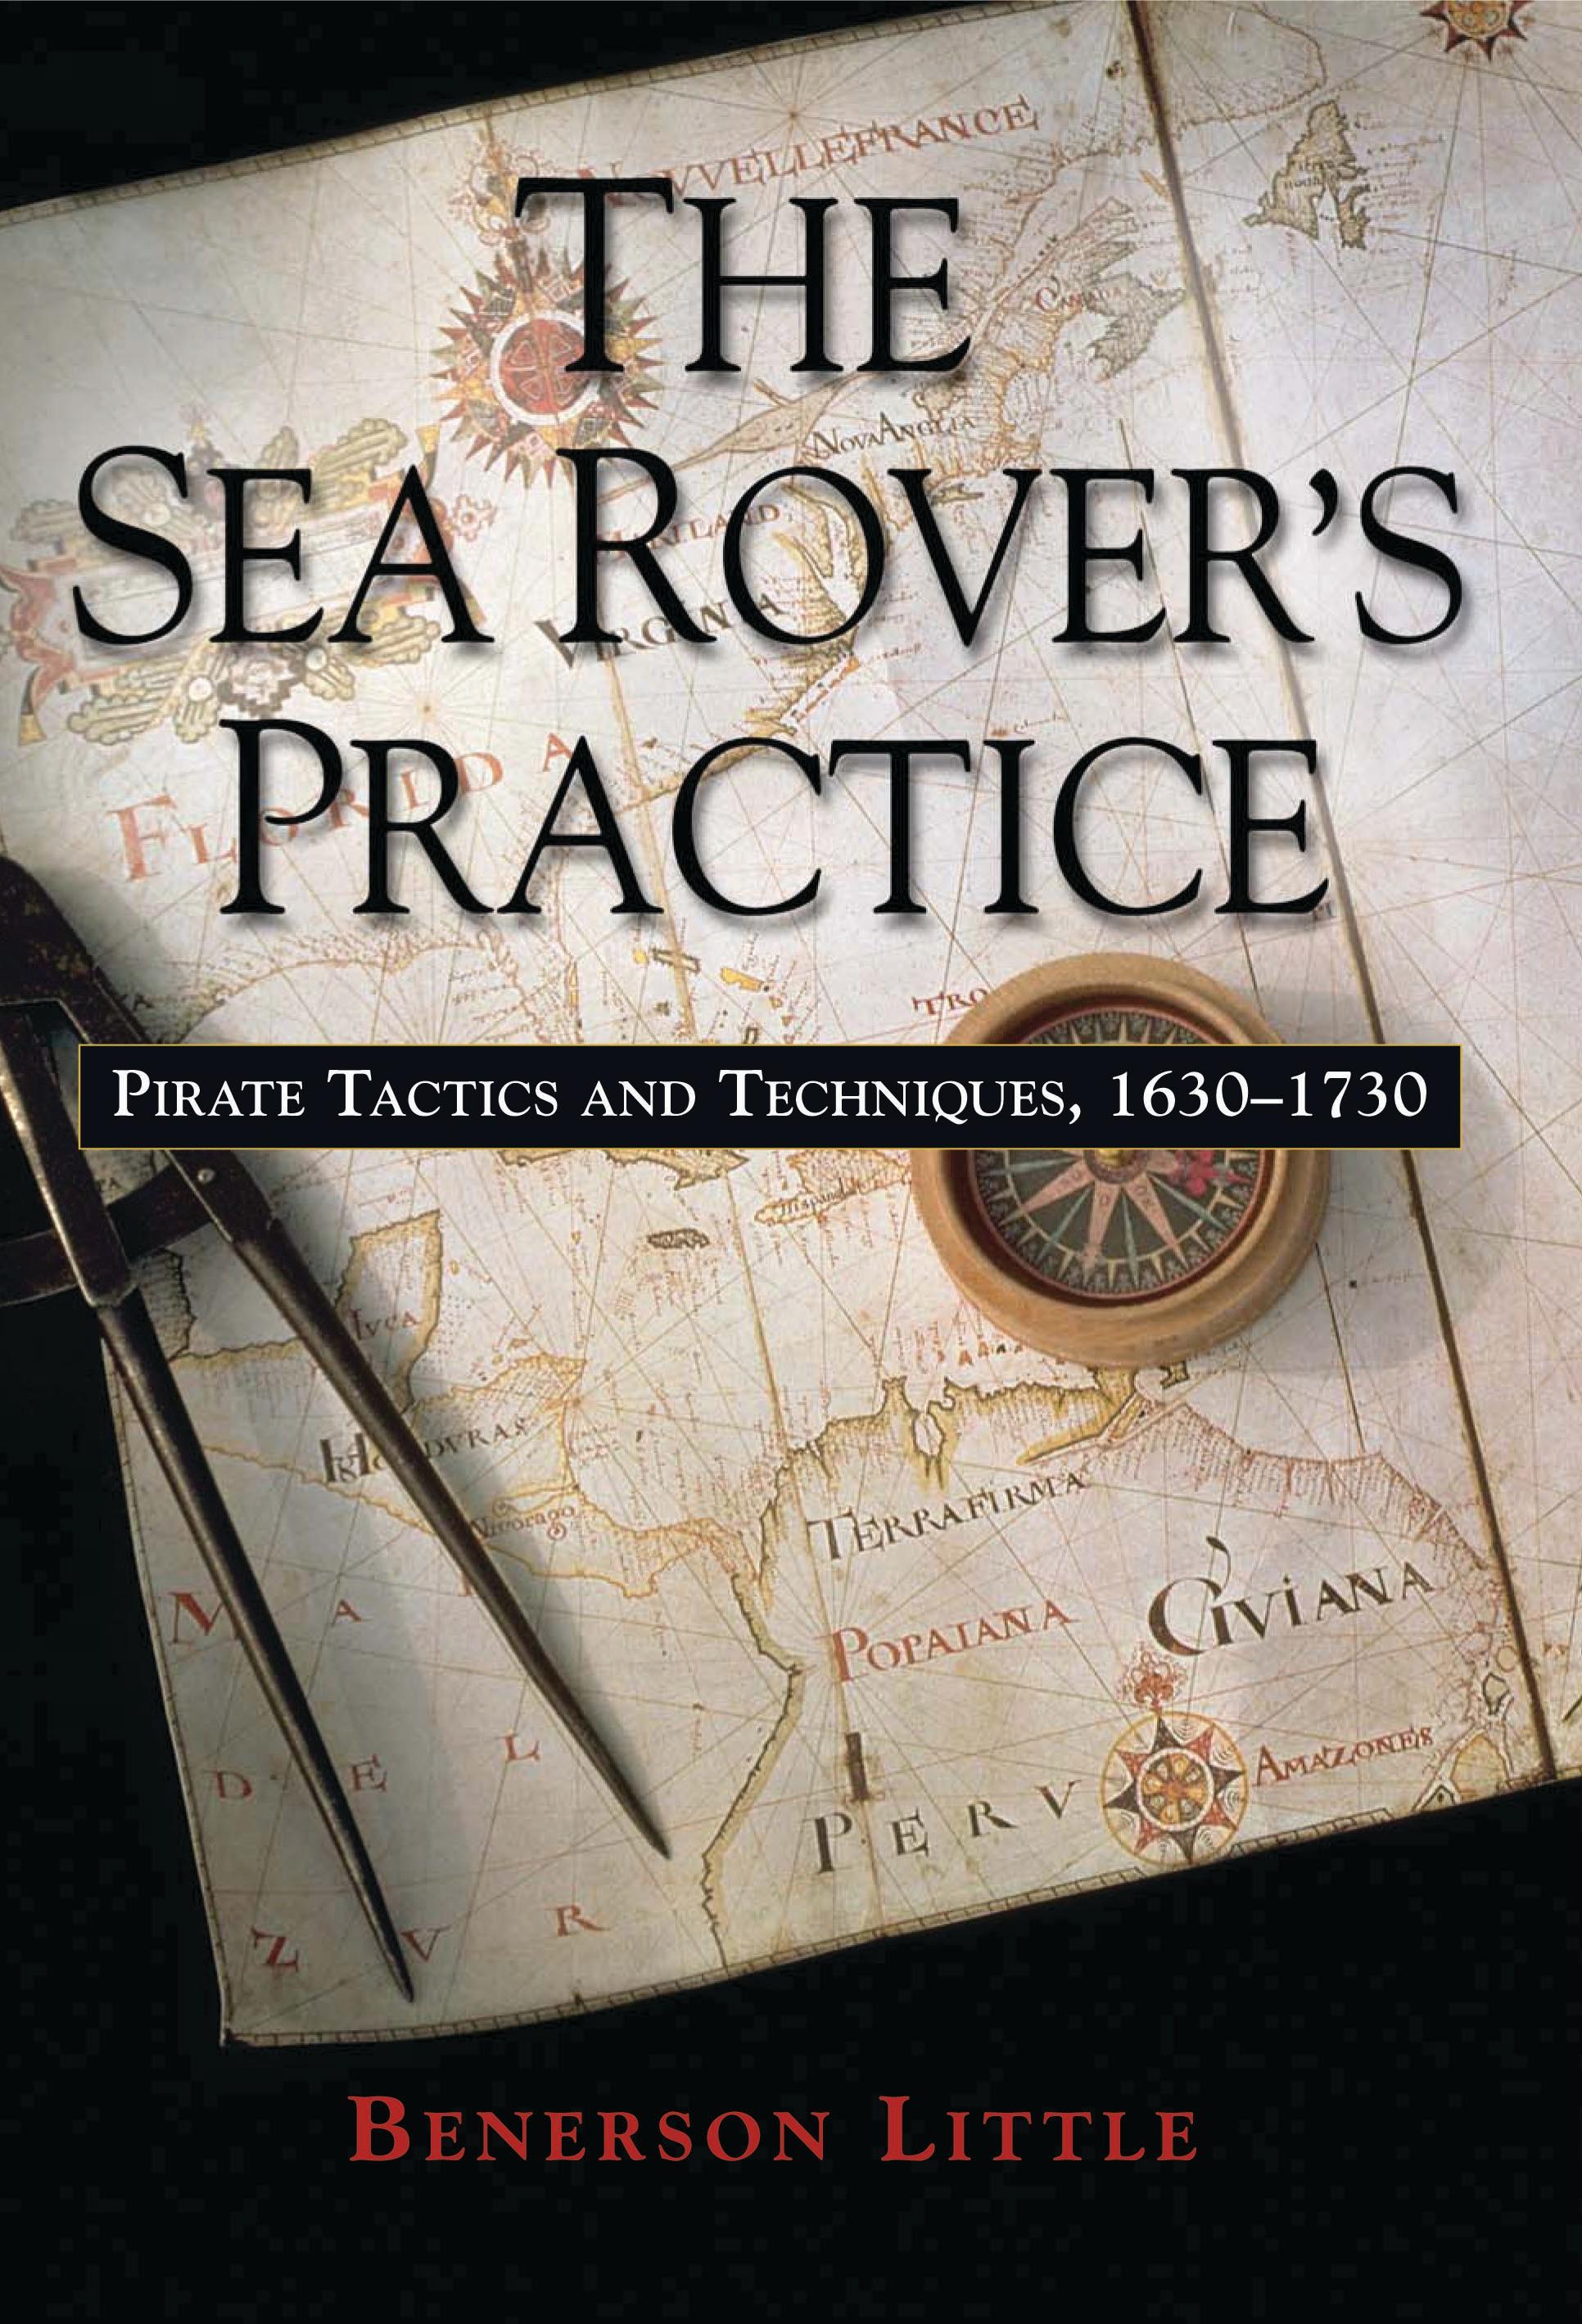 The Sea Rover's Practice: Pirate Tactics and Techniques, 1630-1730 / Benerson Little / Taschenbuch / Englisch / 2007 / POTOMAC BOOKS INC / EAN 9781574889116 - Little, Benerson